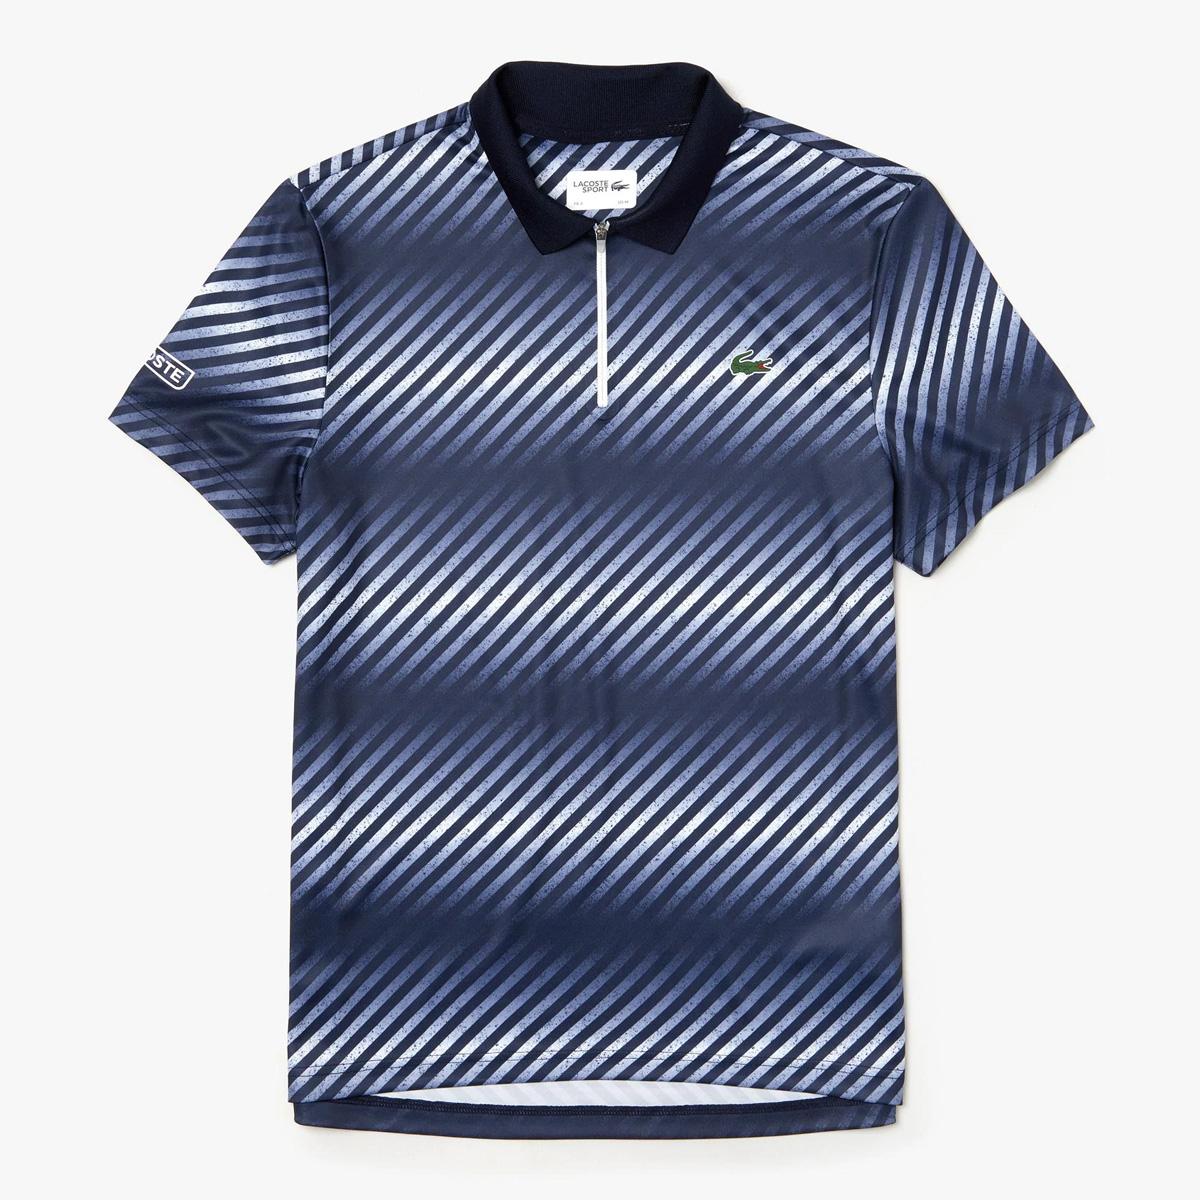 Lacoste Mens Zip Neck Shaded Stripes Tech Pique Polo - Navy Blue/White ...